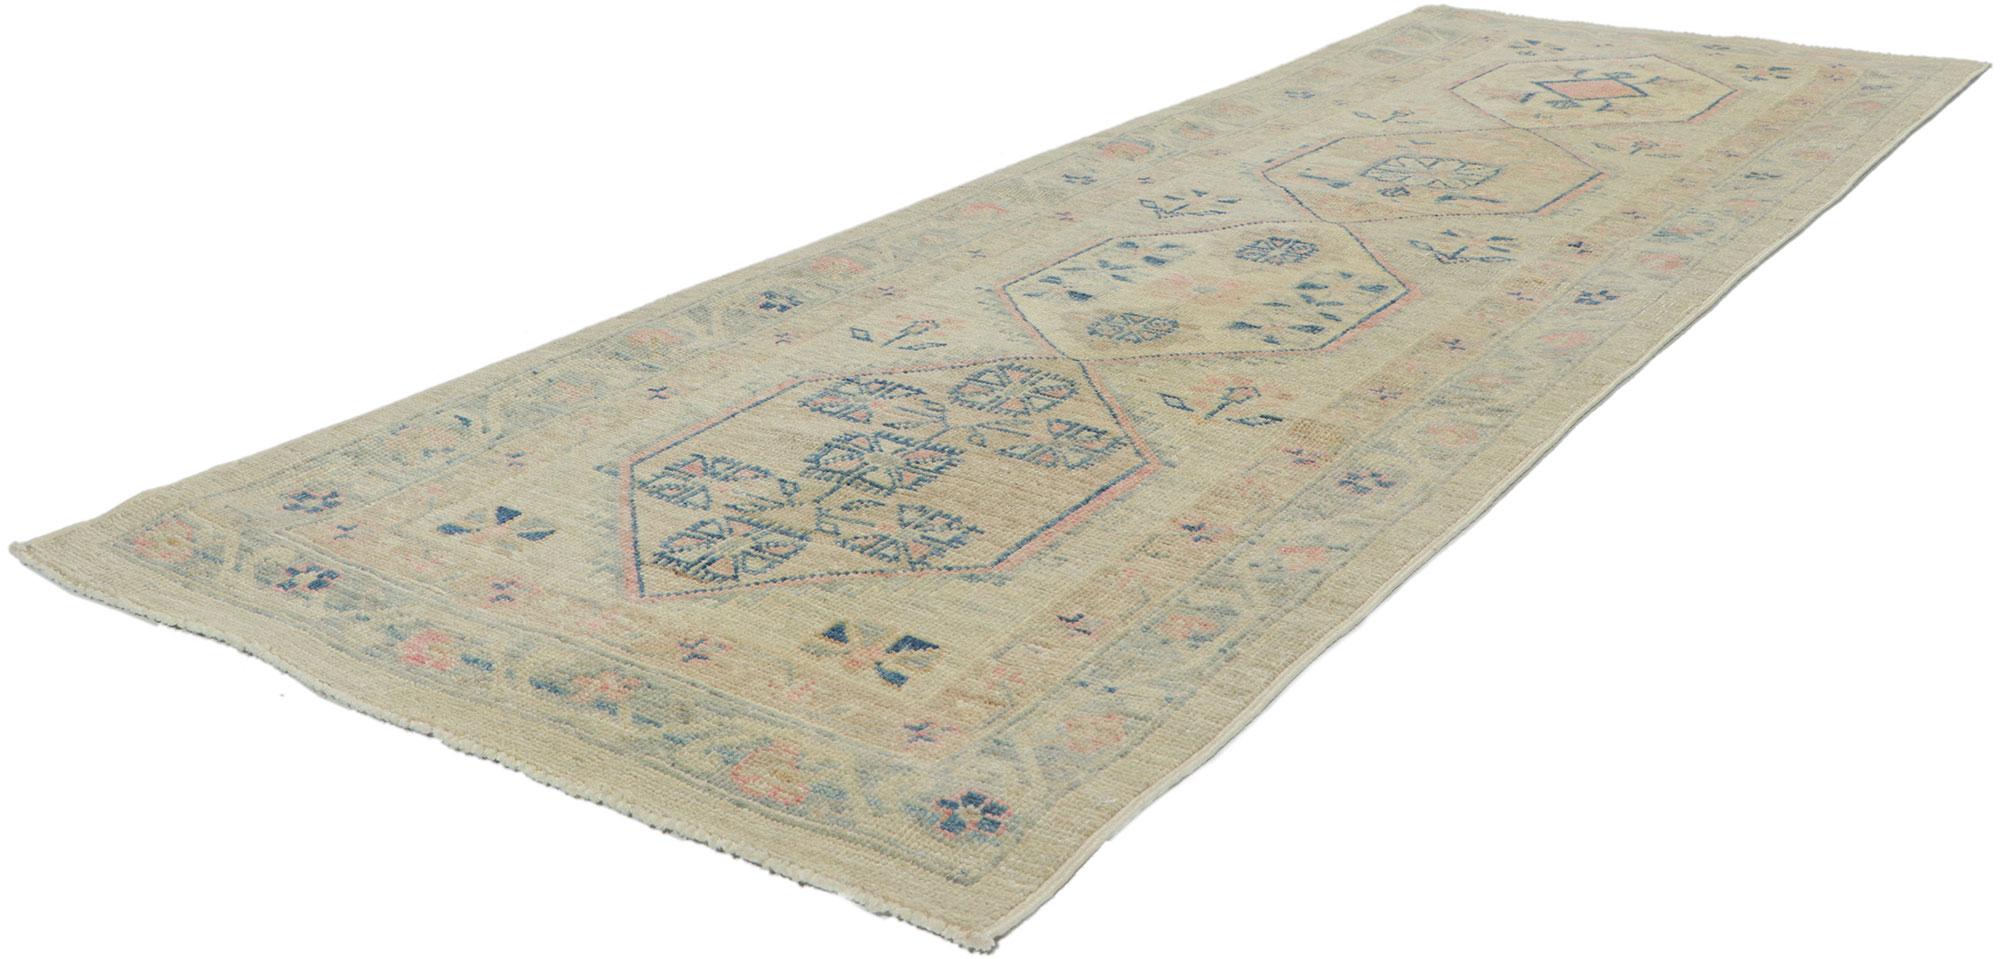 80826 Contemporary Oushak runner, 02'08 x 07'09. Polished and playful, this hand-knotted wool contemporary Contemporary Oushak runner beautifully embodies a modern style. With elements of comfort, modern style and functional versatility, this Oushak